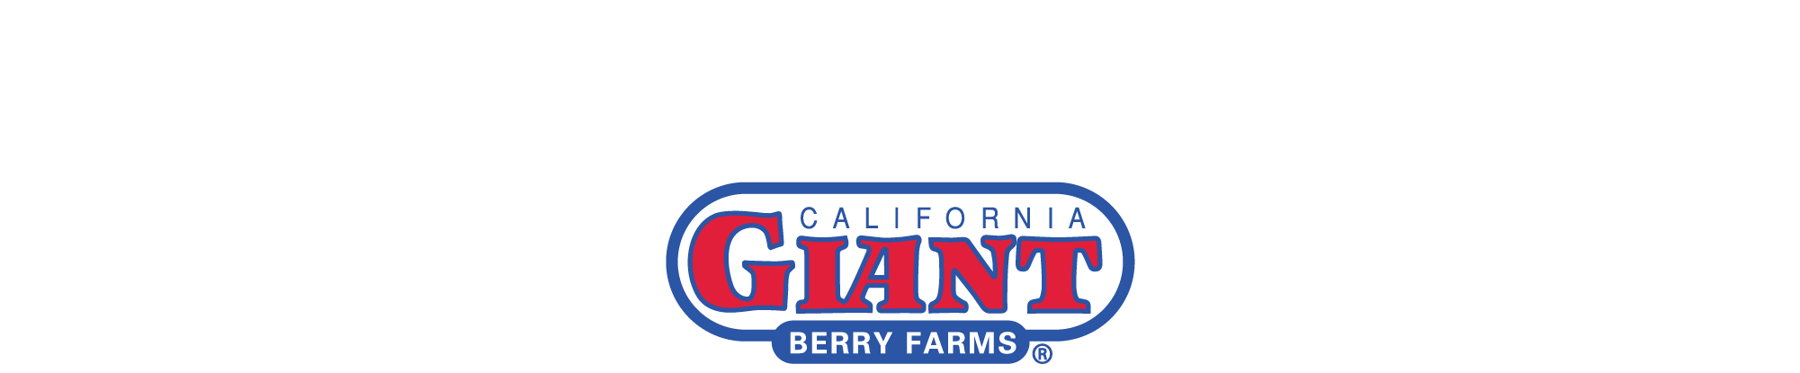 Winter's Best Recipe Collection from California Giant Berry Farms